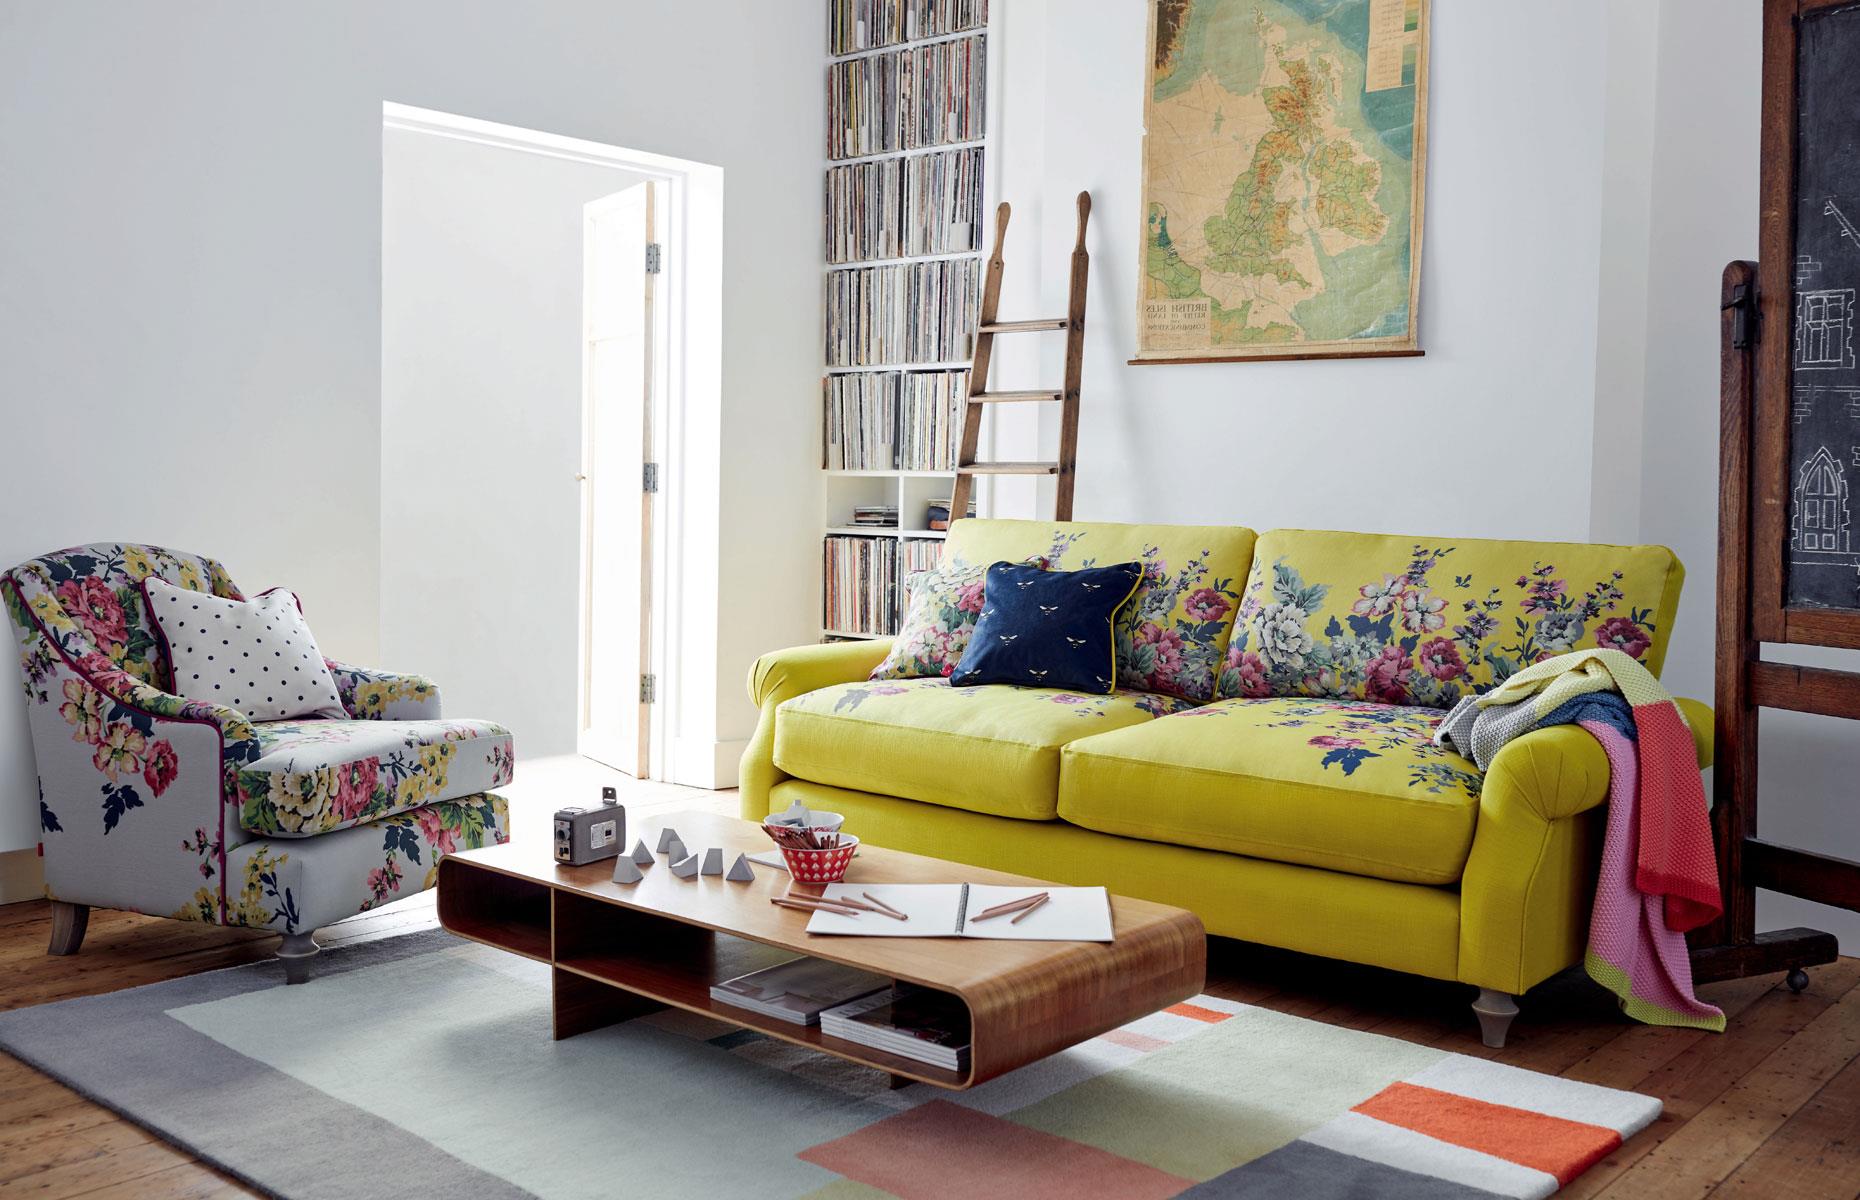 Living Room Ideas For Every Style And Budget Lovepropertycom